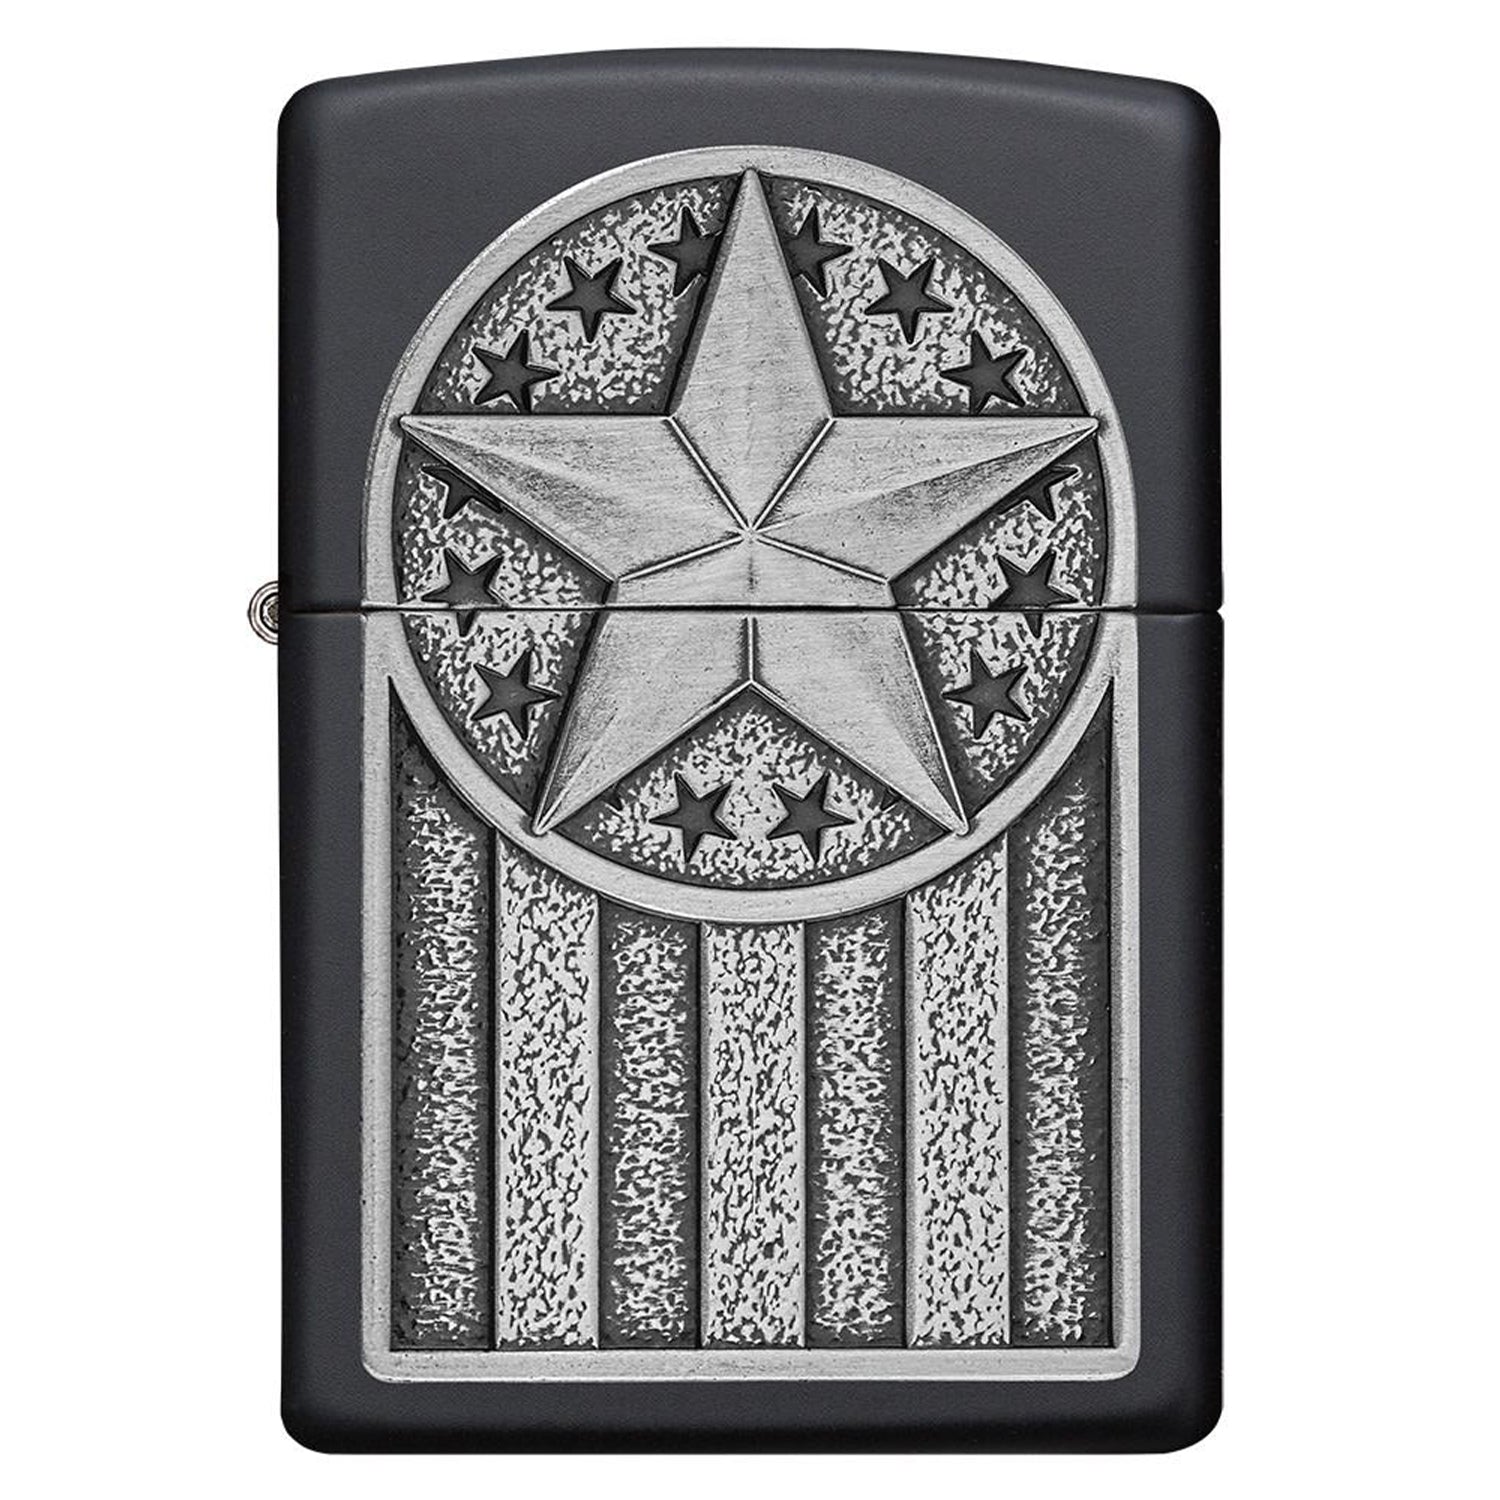 Hong Kong Zippo Lighters - Authentic Military & Street Styles